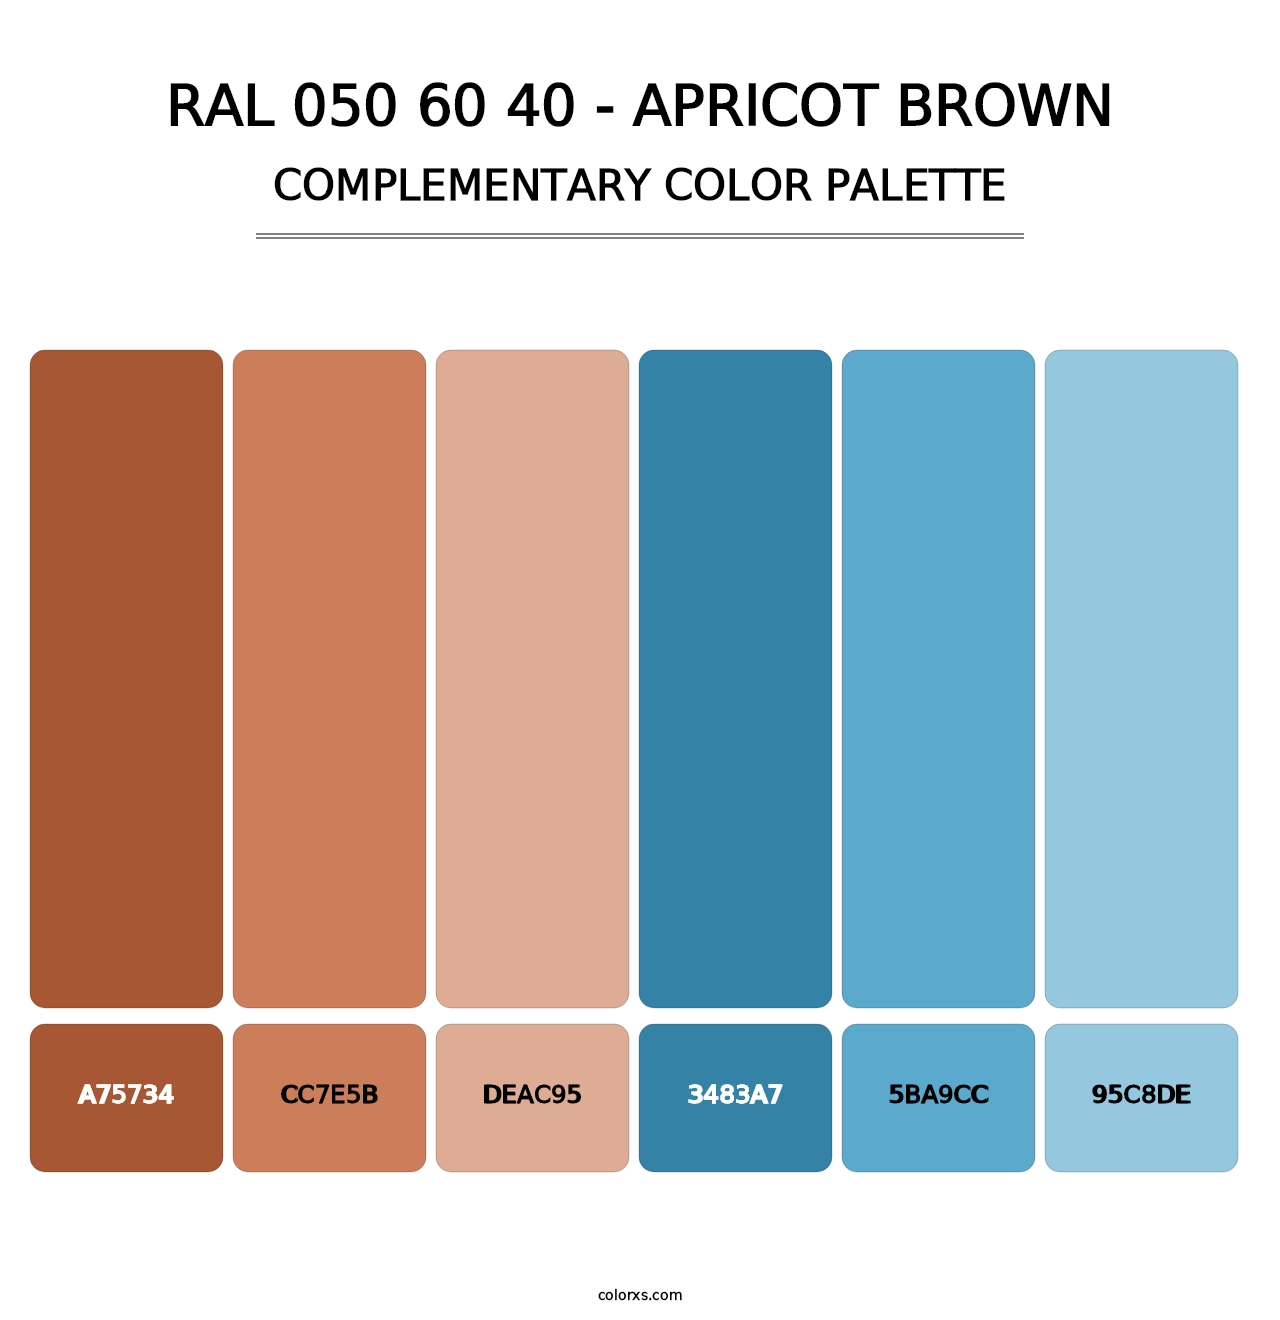 RAL 050 60 40 - Apricot Brown - Complementary Color Palette